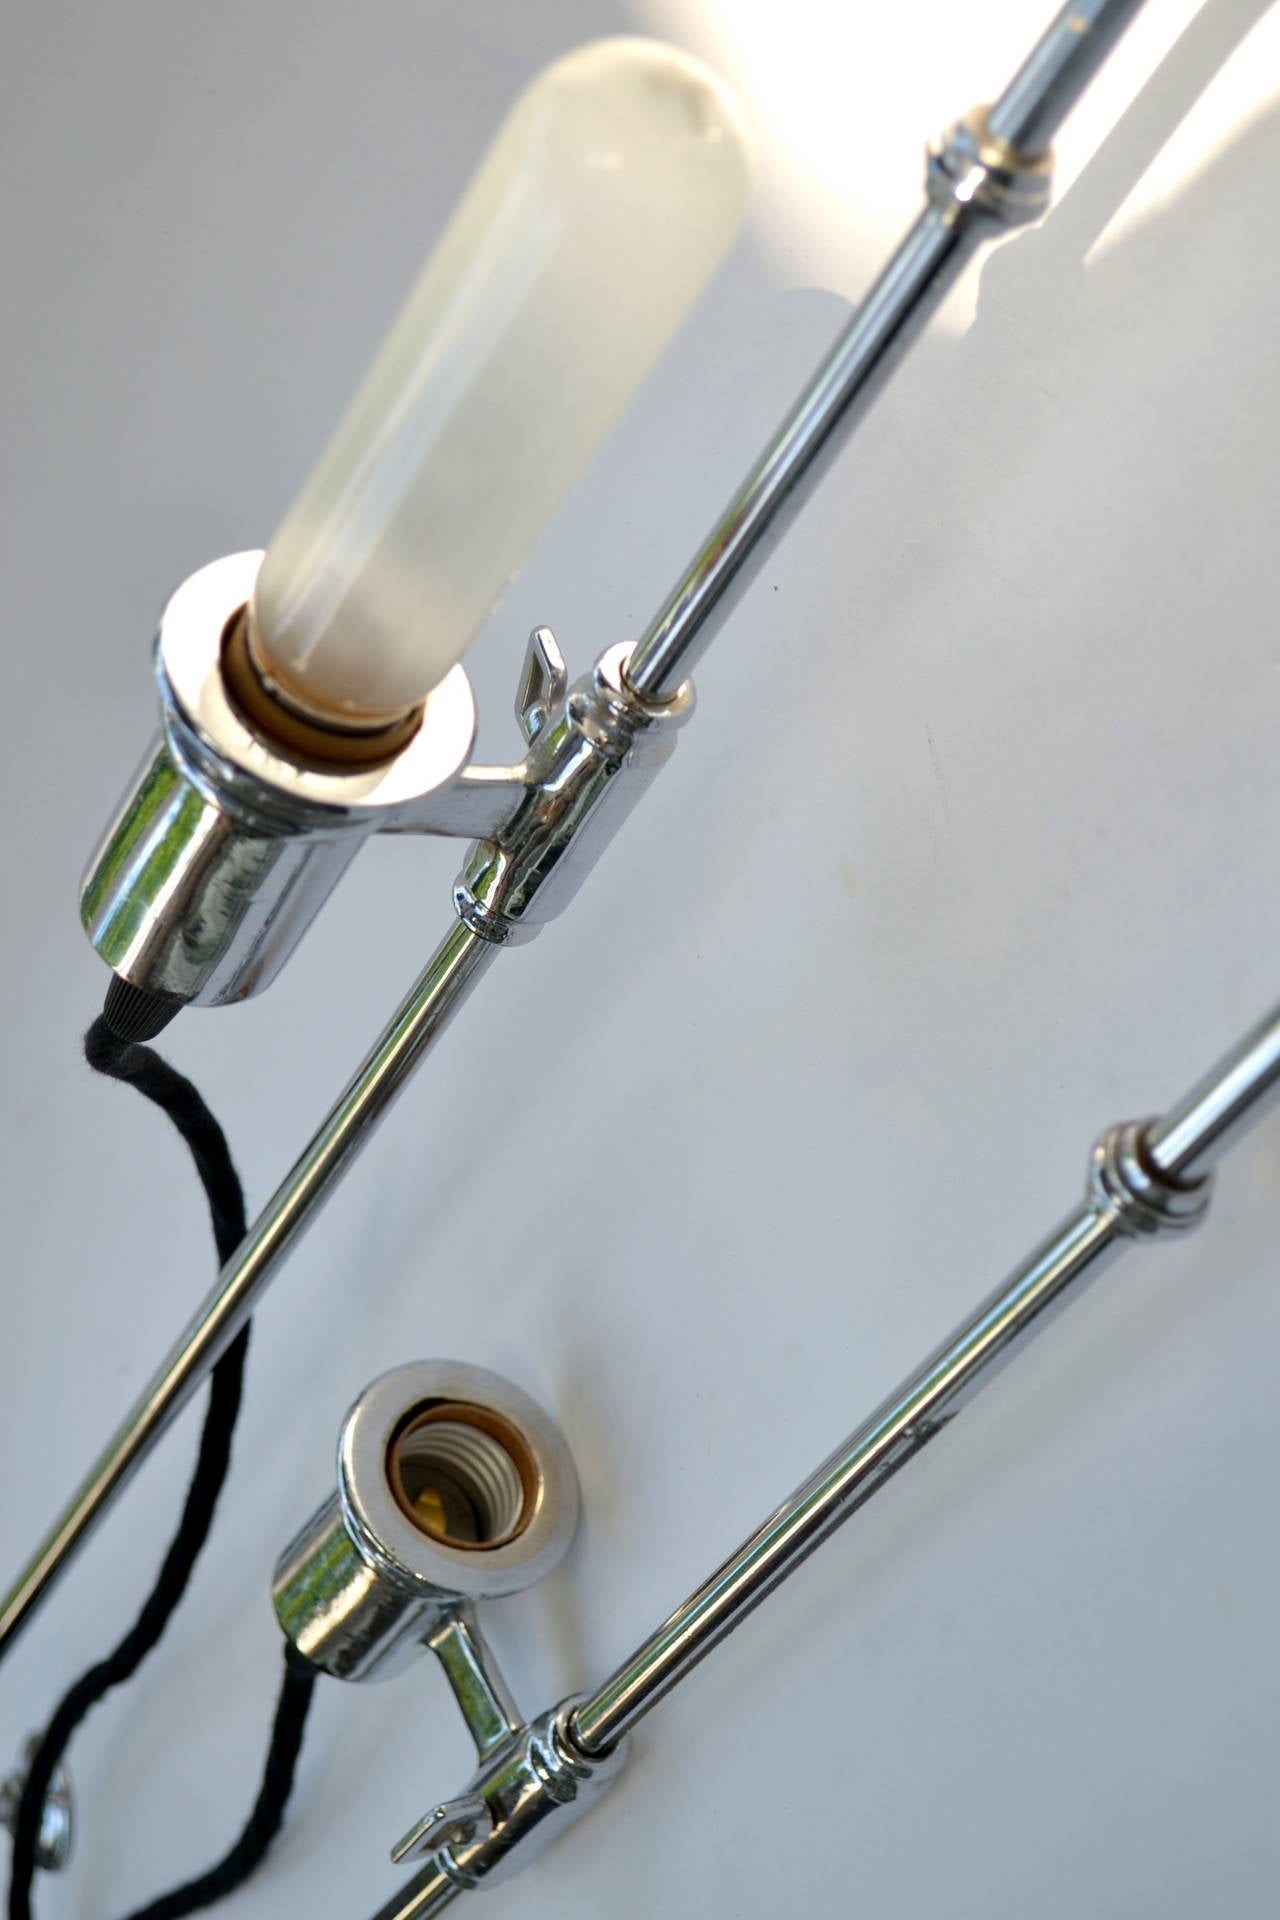 Art Deco Arizona Biltmore Chrome-Plated Adjustable Sconces from 1929 Rare For Sale